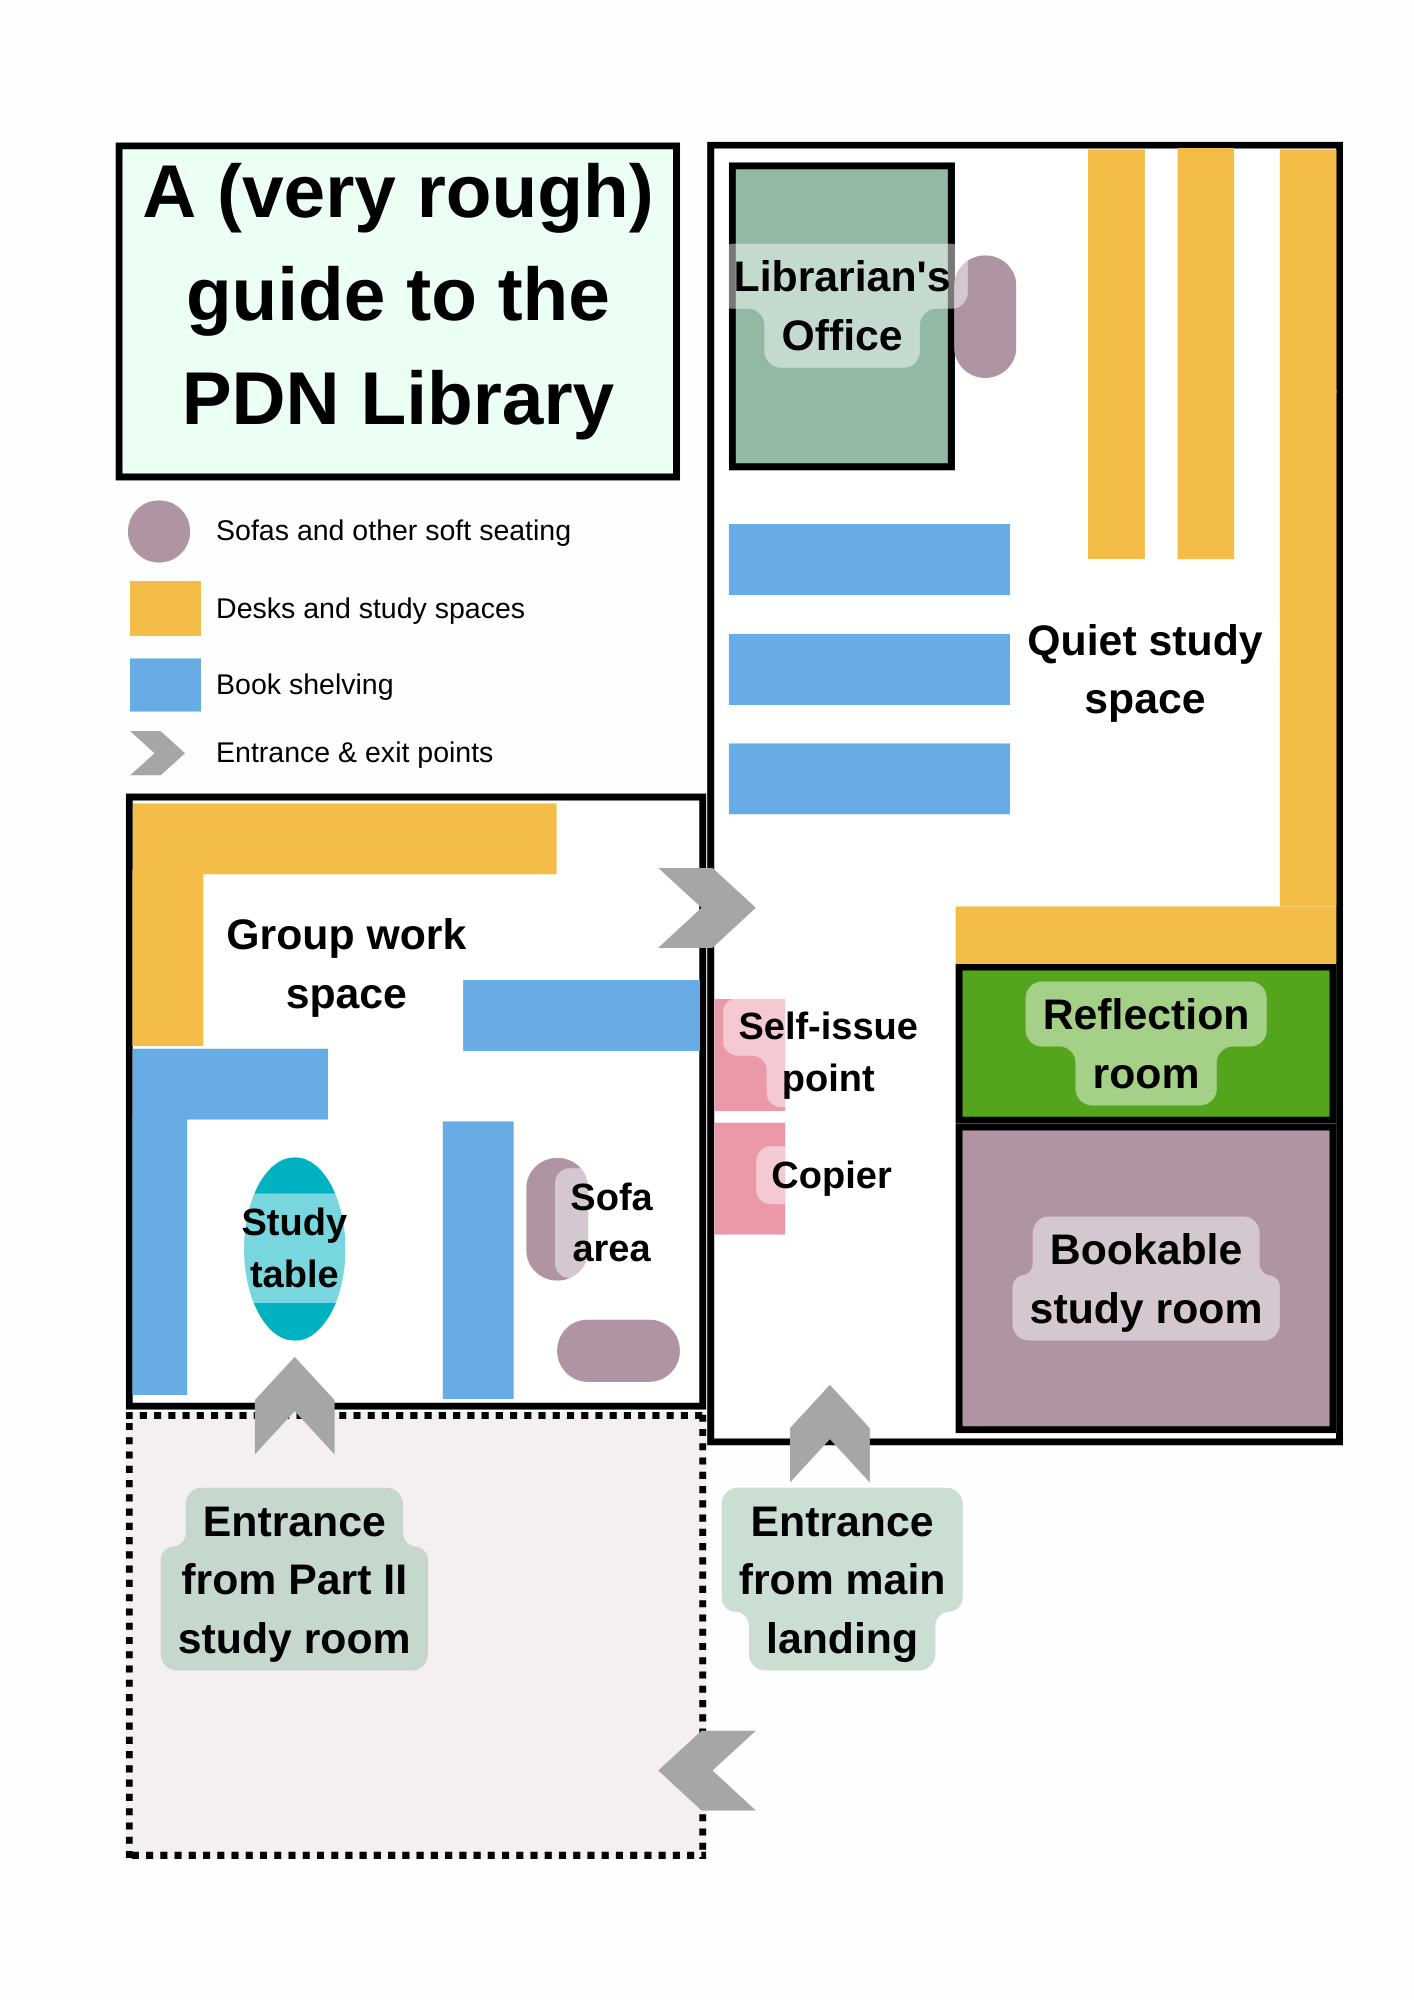 Simplified representation of the PDN Library showing the Group Work space and Quiet Study space with lots of desks, sofas and other fun things!